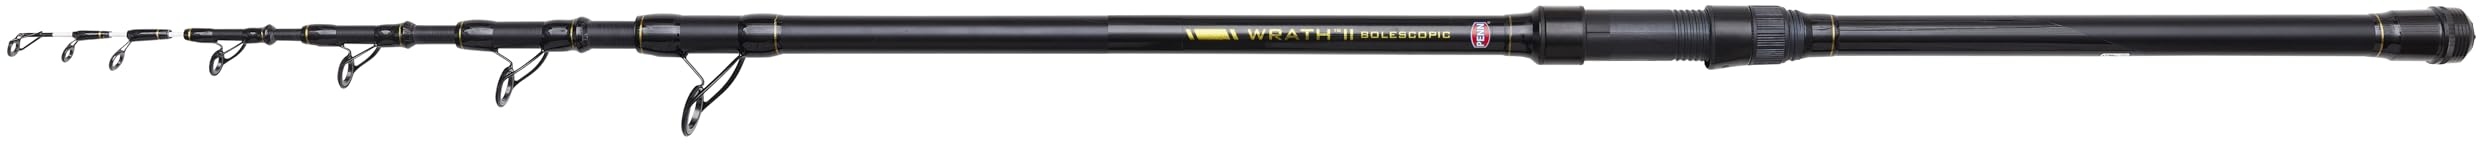 Penn Wrath II Bolescopic Sea Fishing Rod – A Spinning Rod Designed for a Wide Range of Different Fishing Applications. Strong Yet Sensitive Blank with a Telescopic Design for Easy Transport